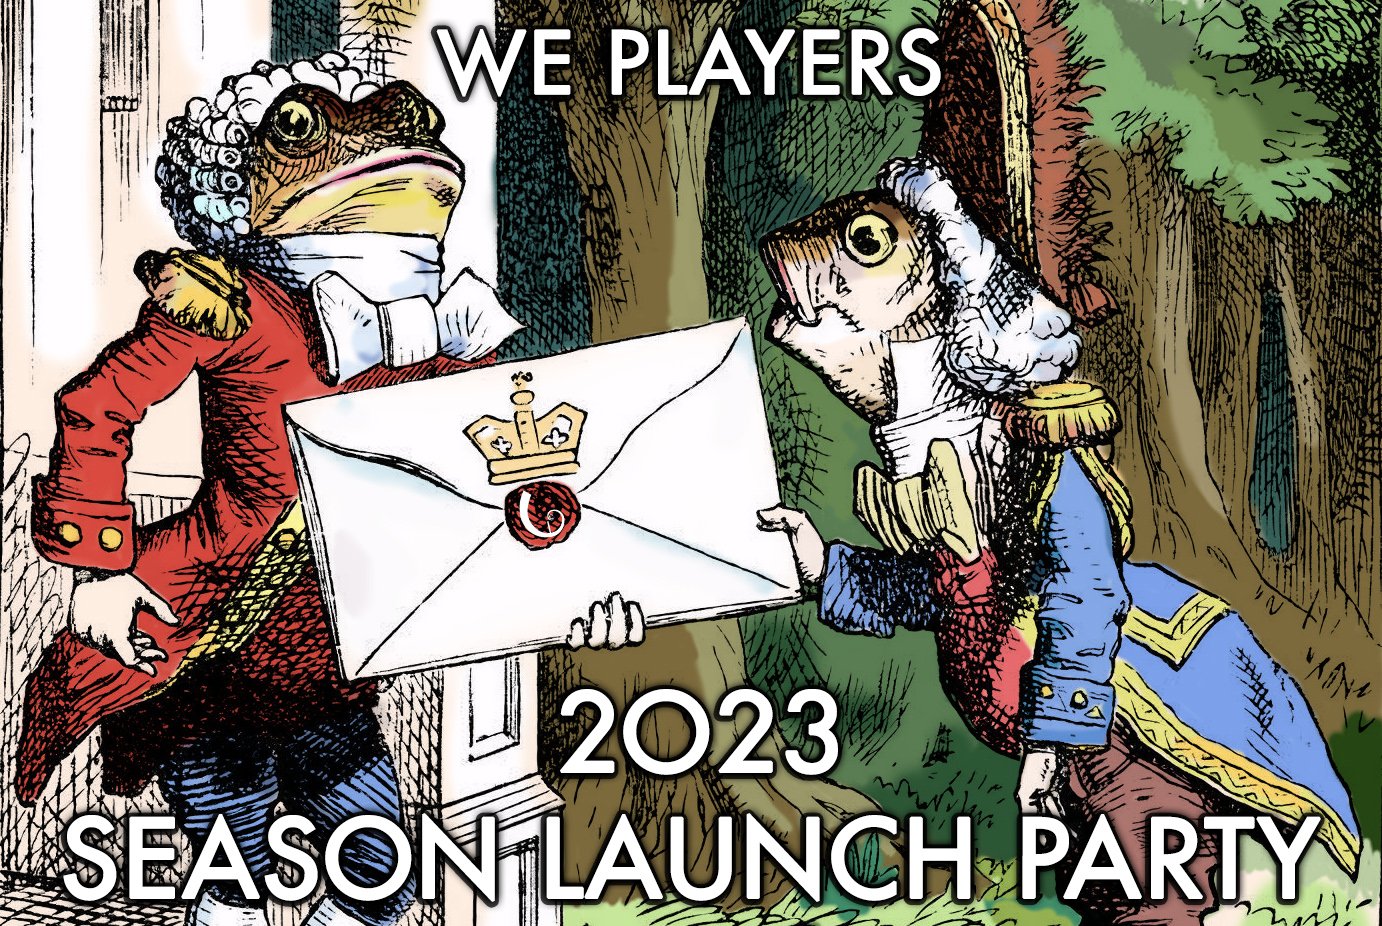 We Players - Season Launch Party 2023 - 1380px.jpg